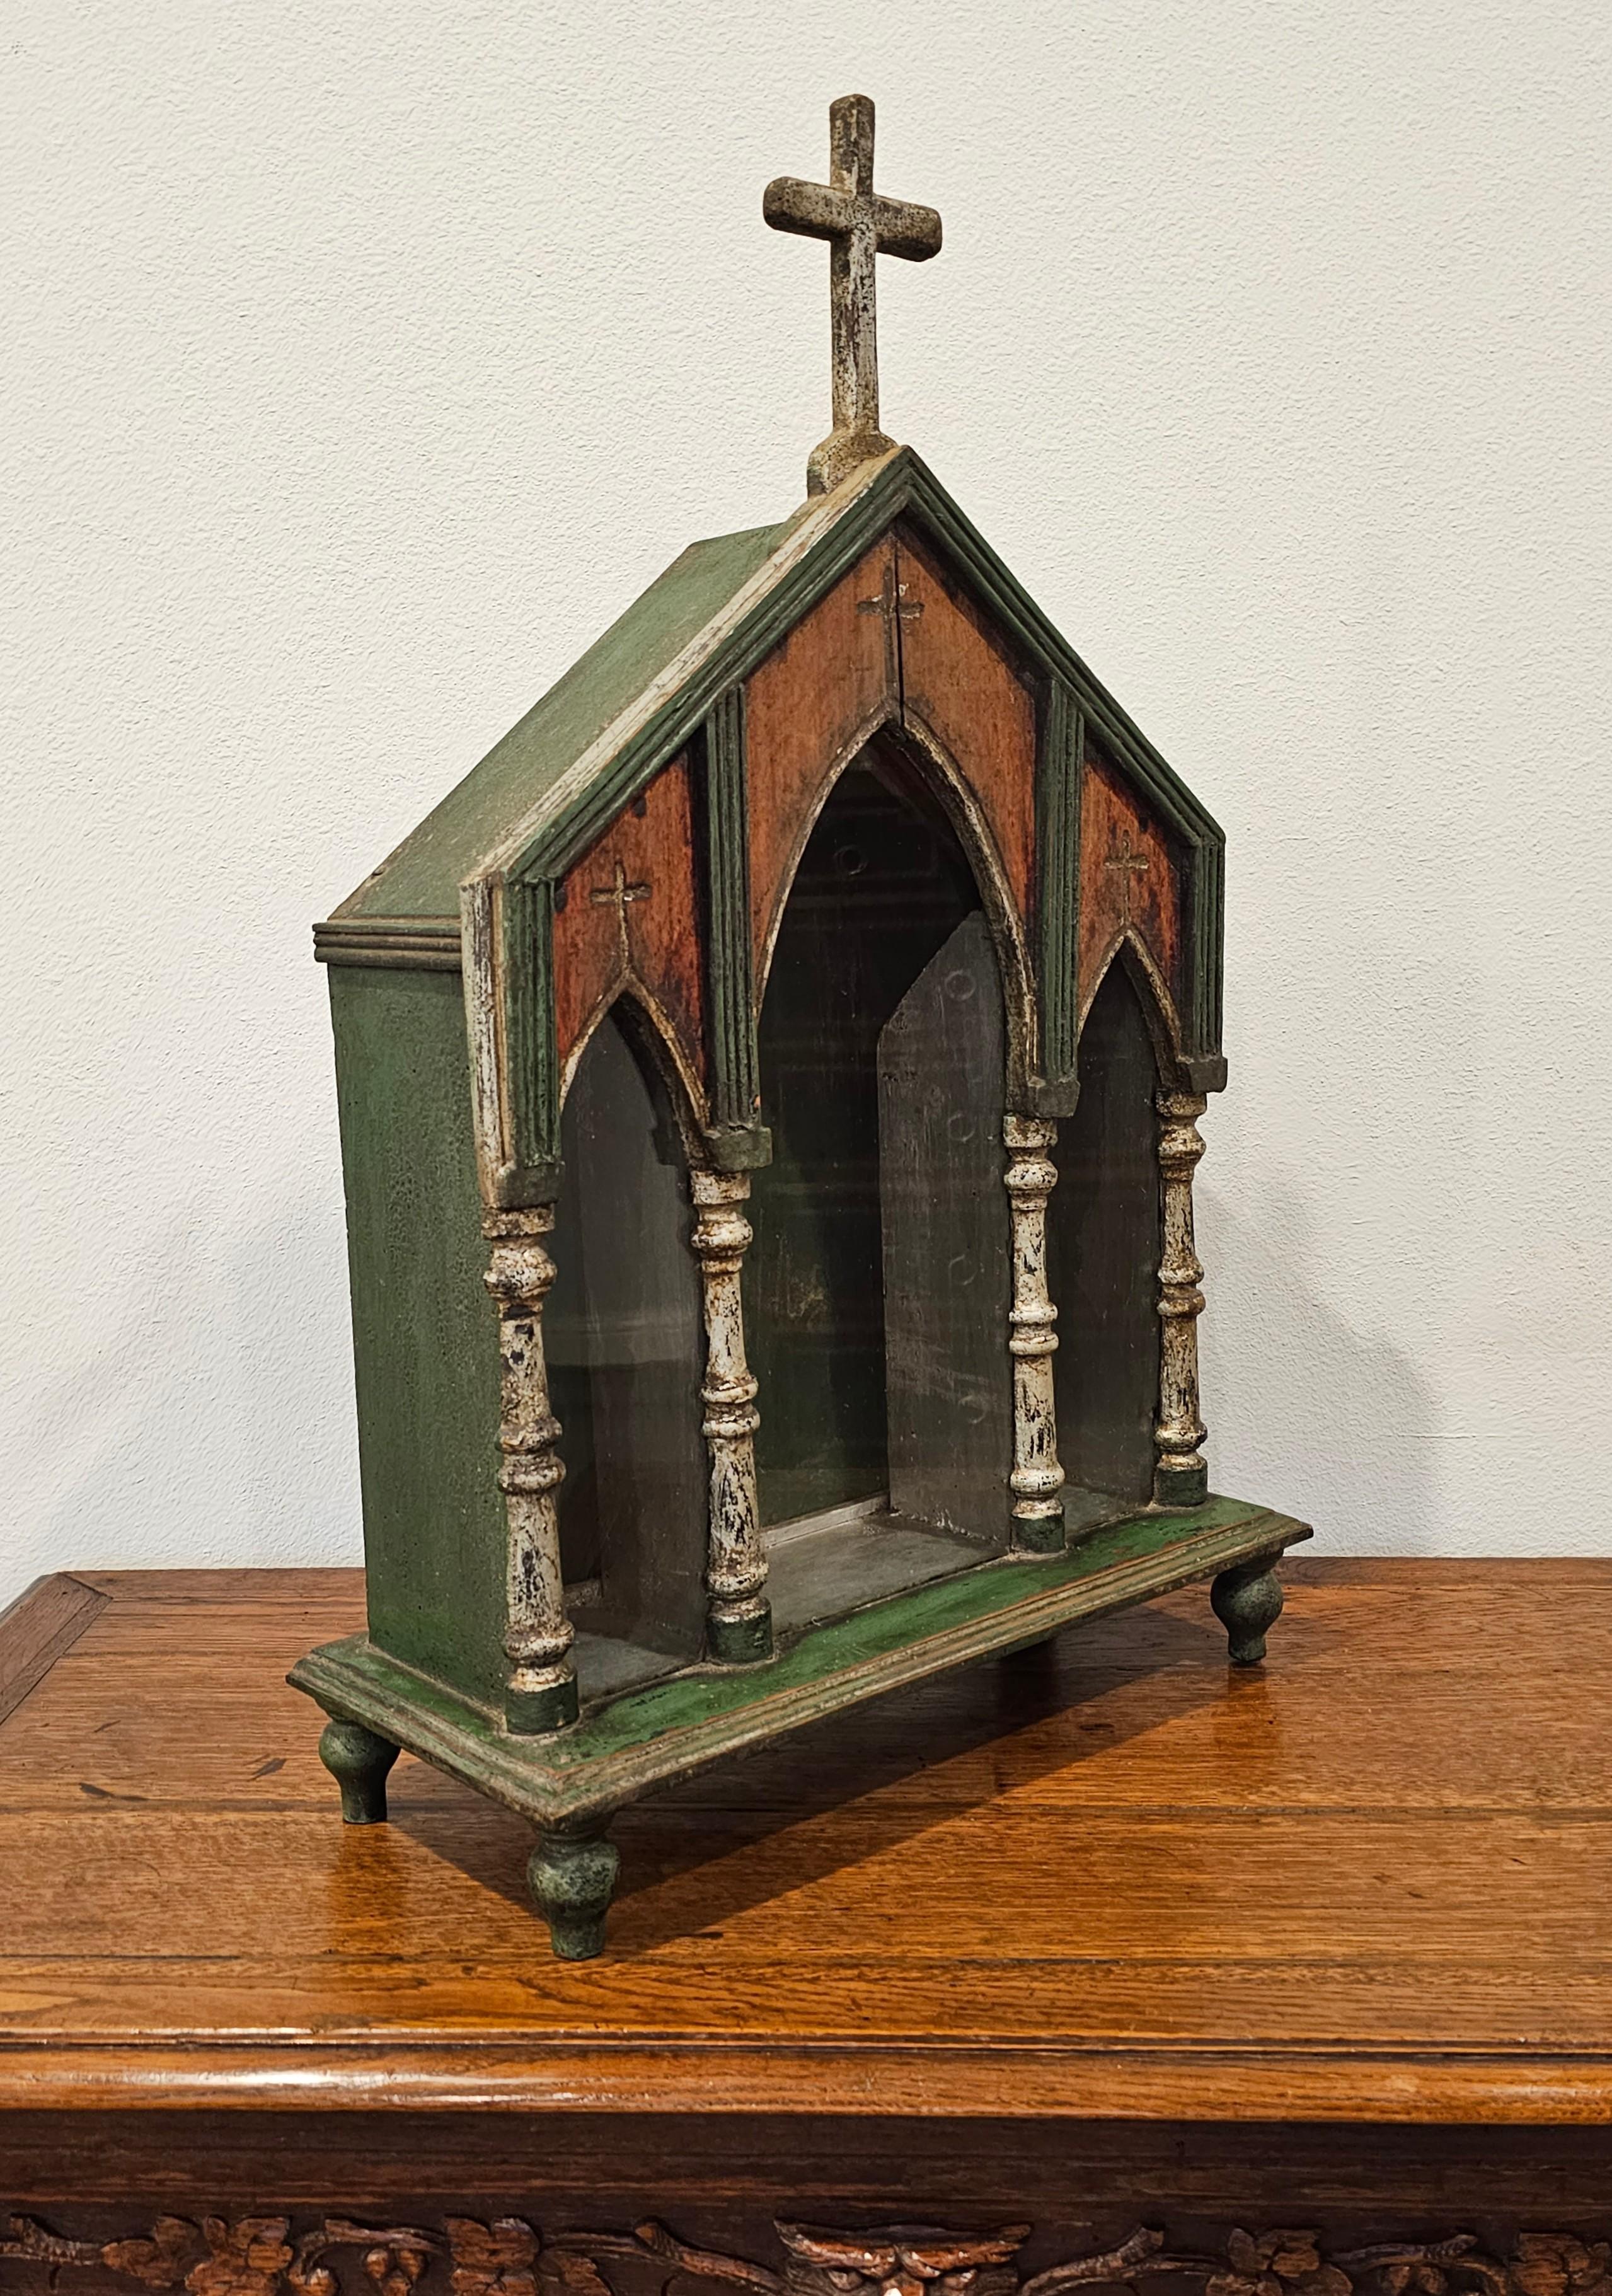 A large one-of-a-kind European antique hand carved polychrome painted silver-gilt religious altar niche with beautifully aged warm distressed patina.

Born in Continental Europe around the turn of the late 19th / early 20th century, rustic